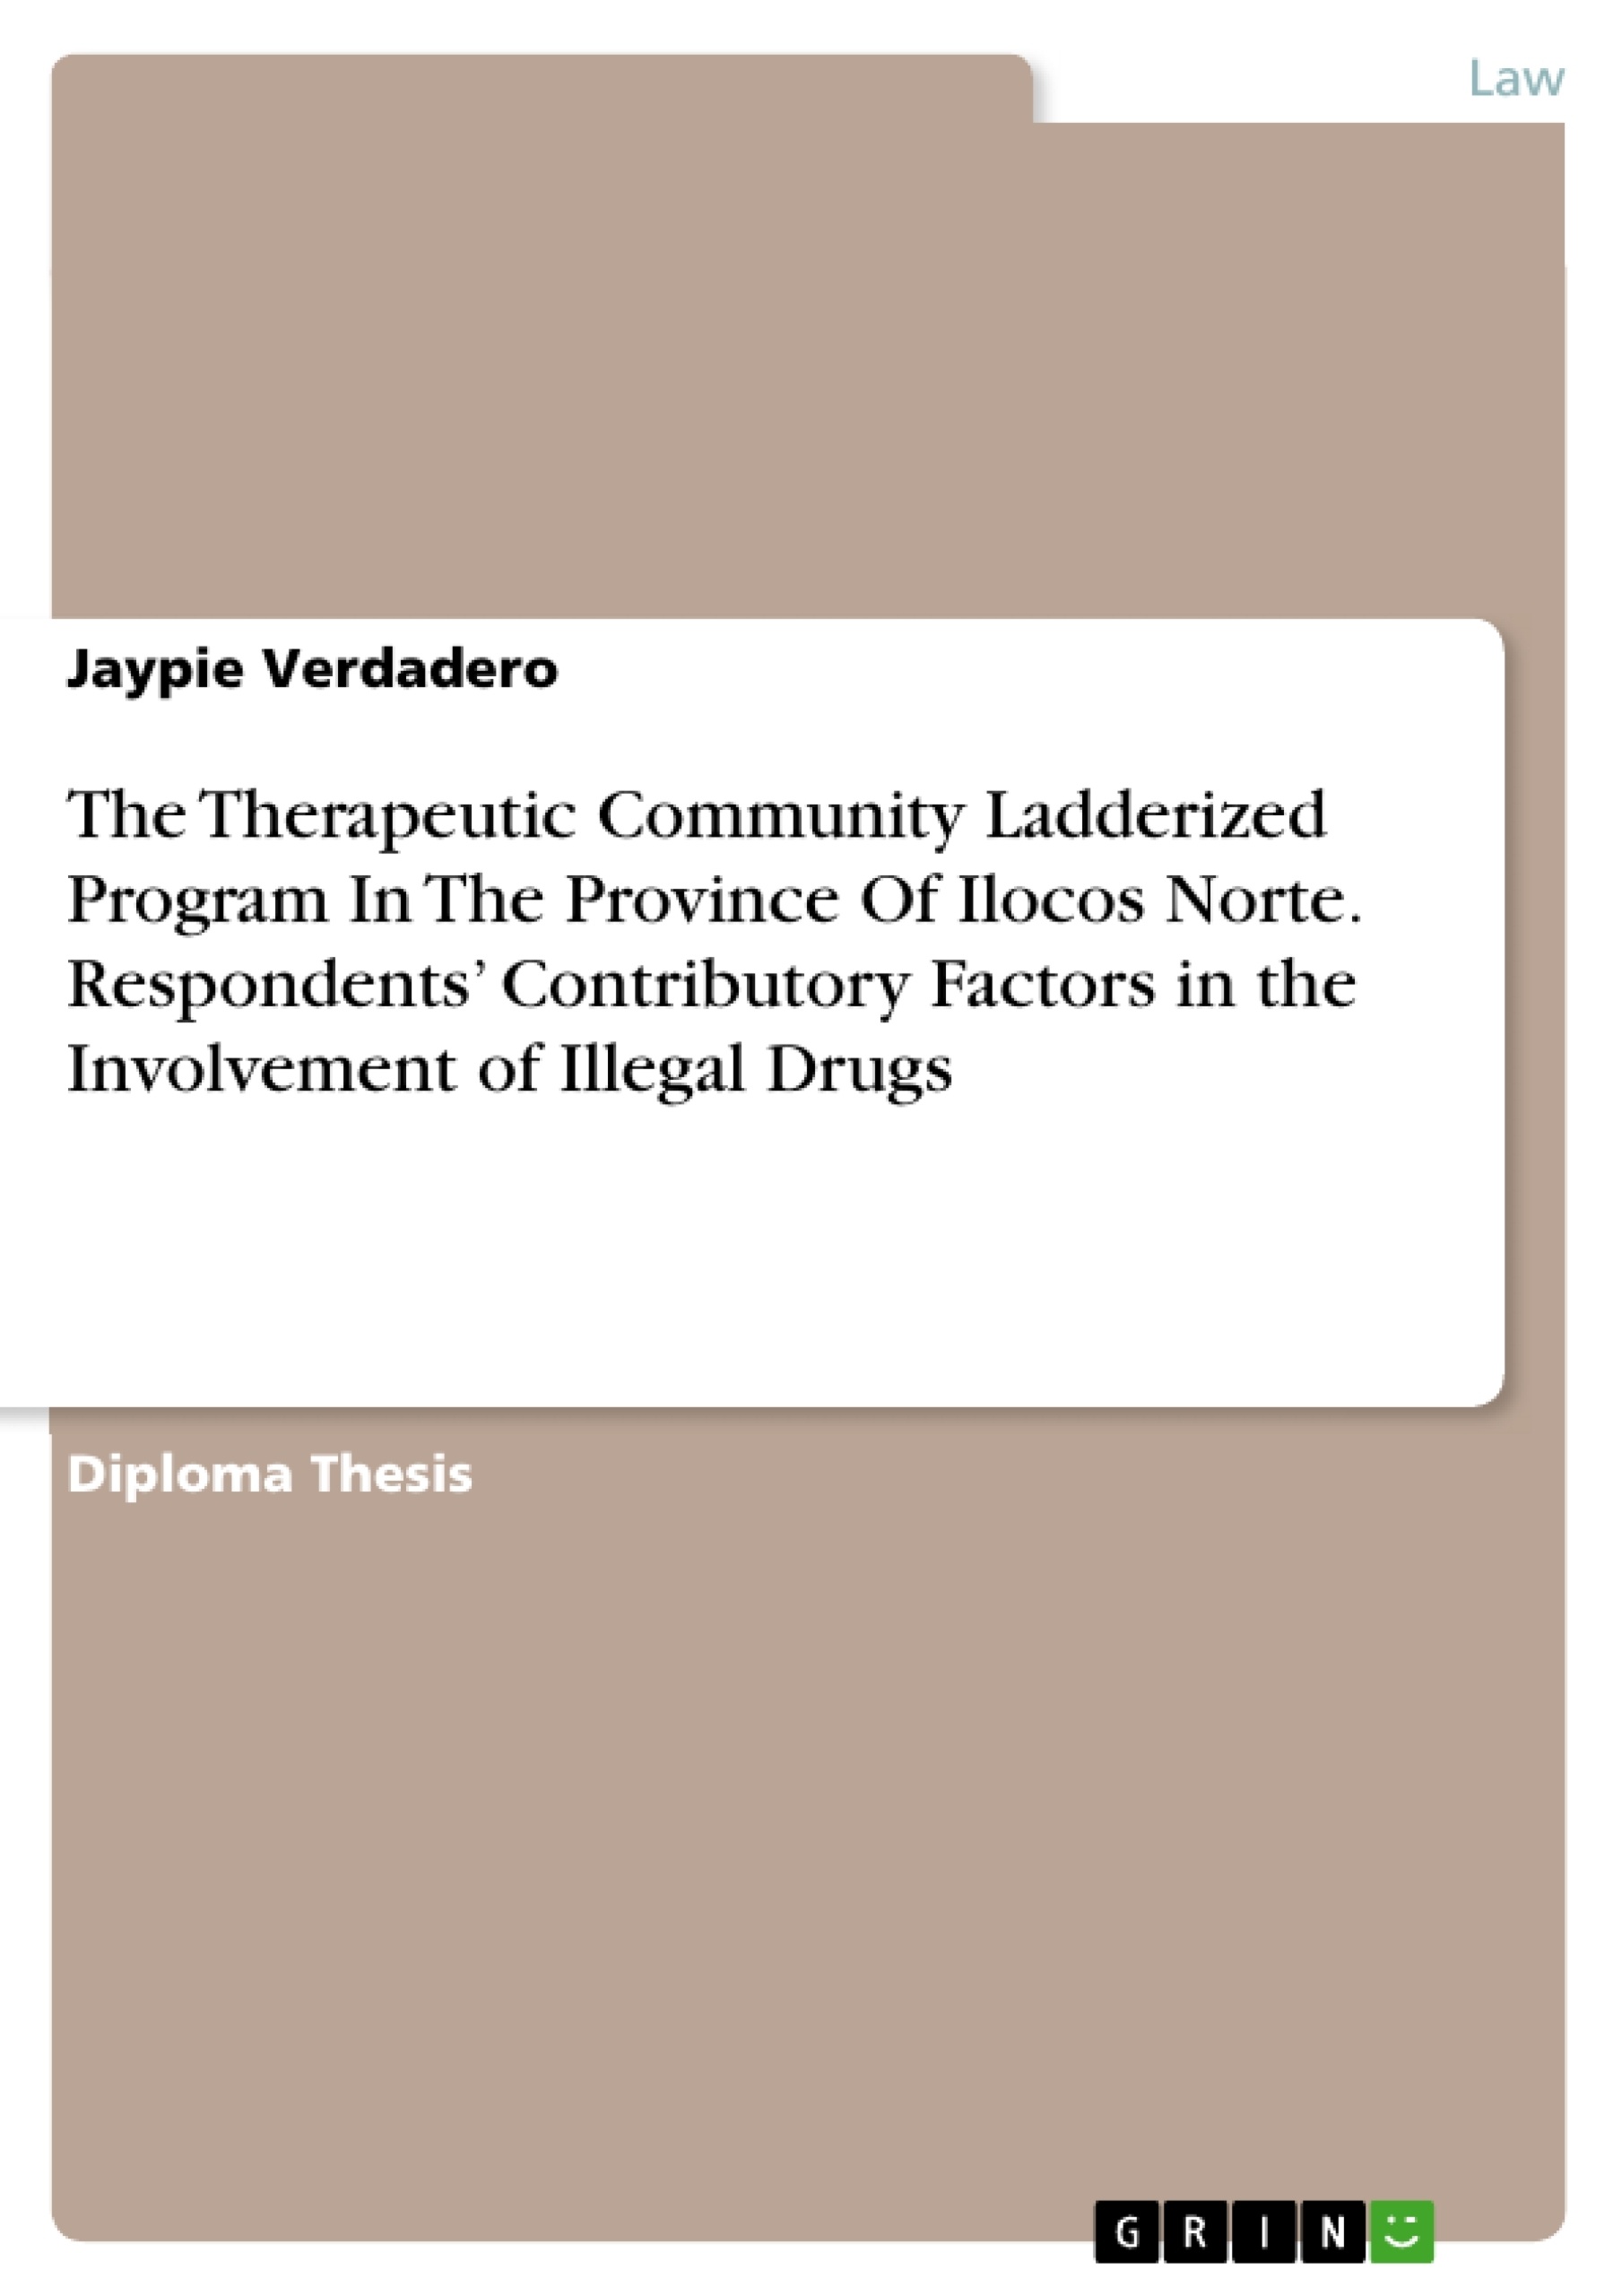 Title: The Therapeutic Community Ladderized Program In The Province Of Ilocos Norte. Respondents’ Contributory Factors in the Involvement of Illegal Drugs